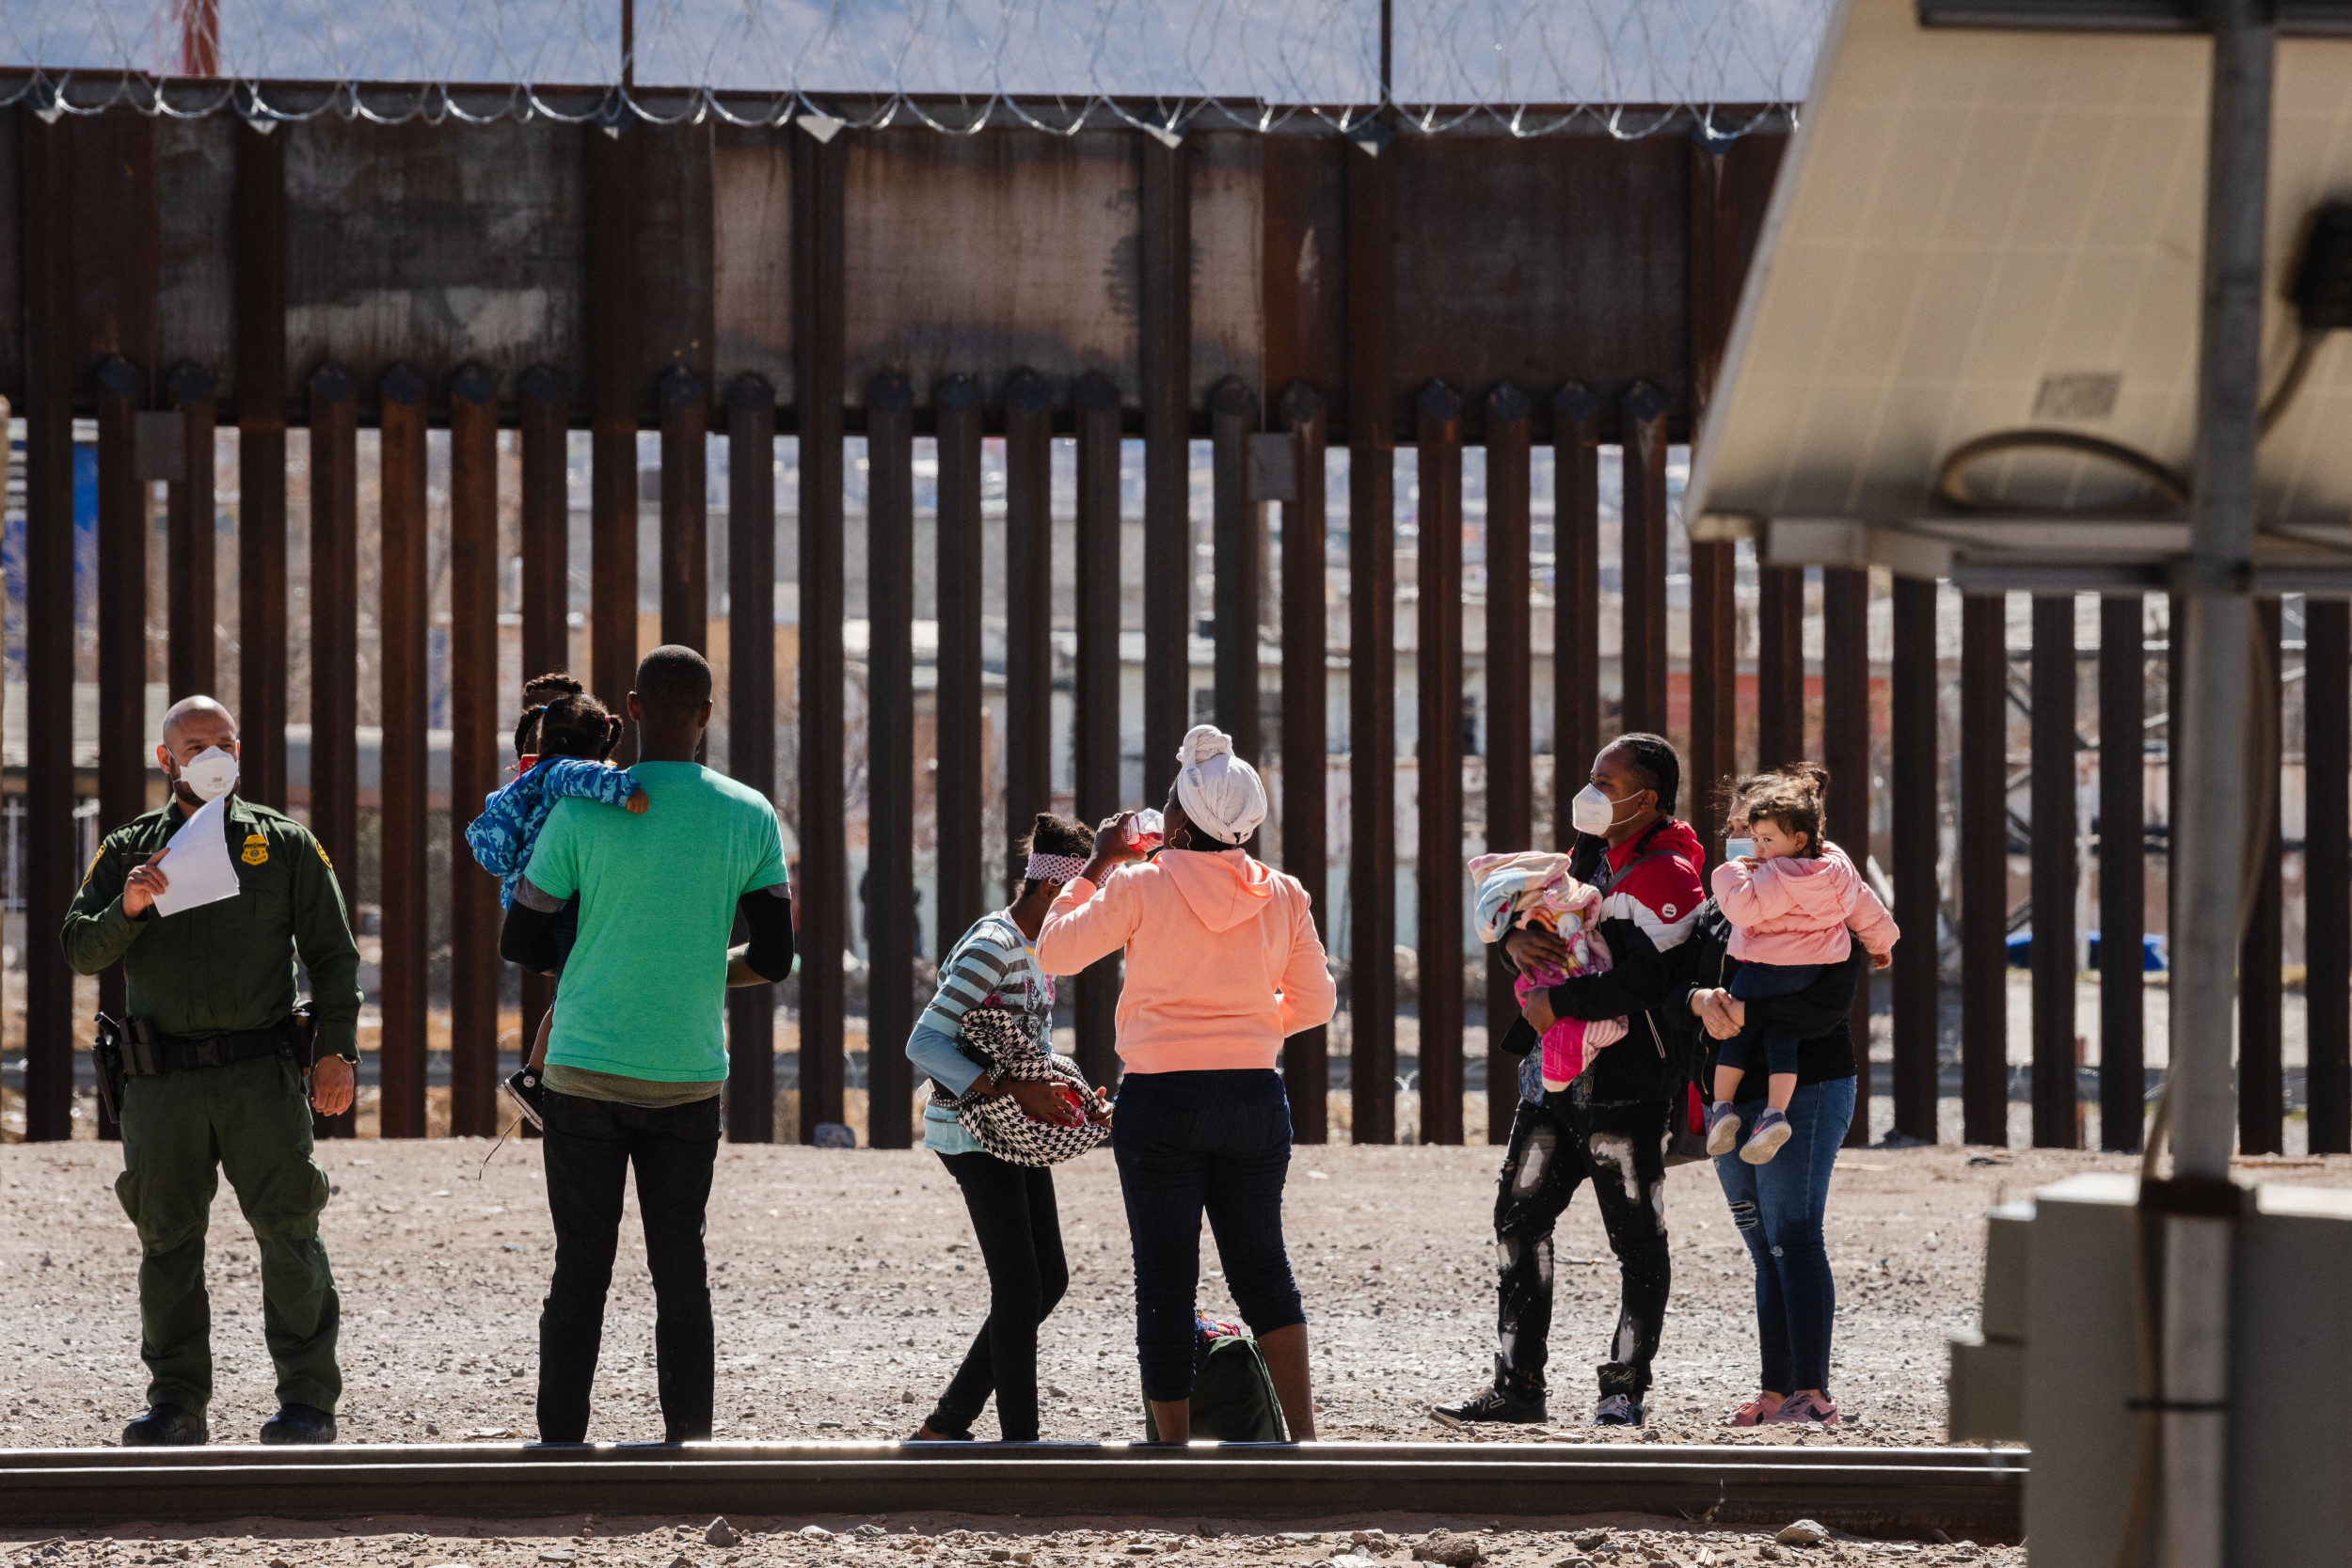 No, There's No Border Crisis. Republicans Are Perpetuating Another Big